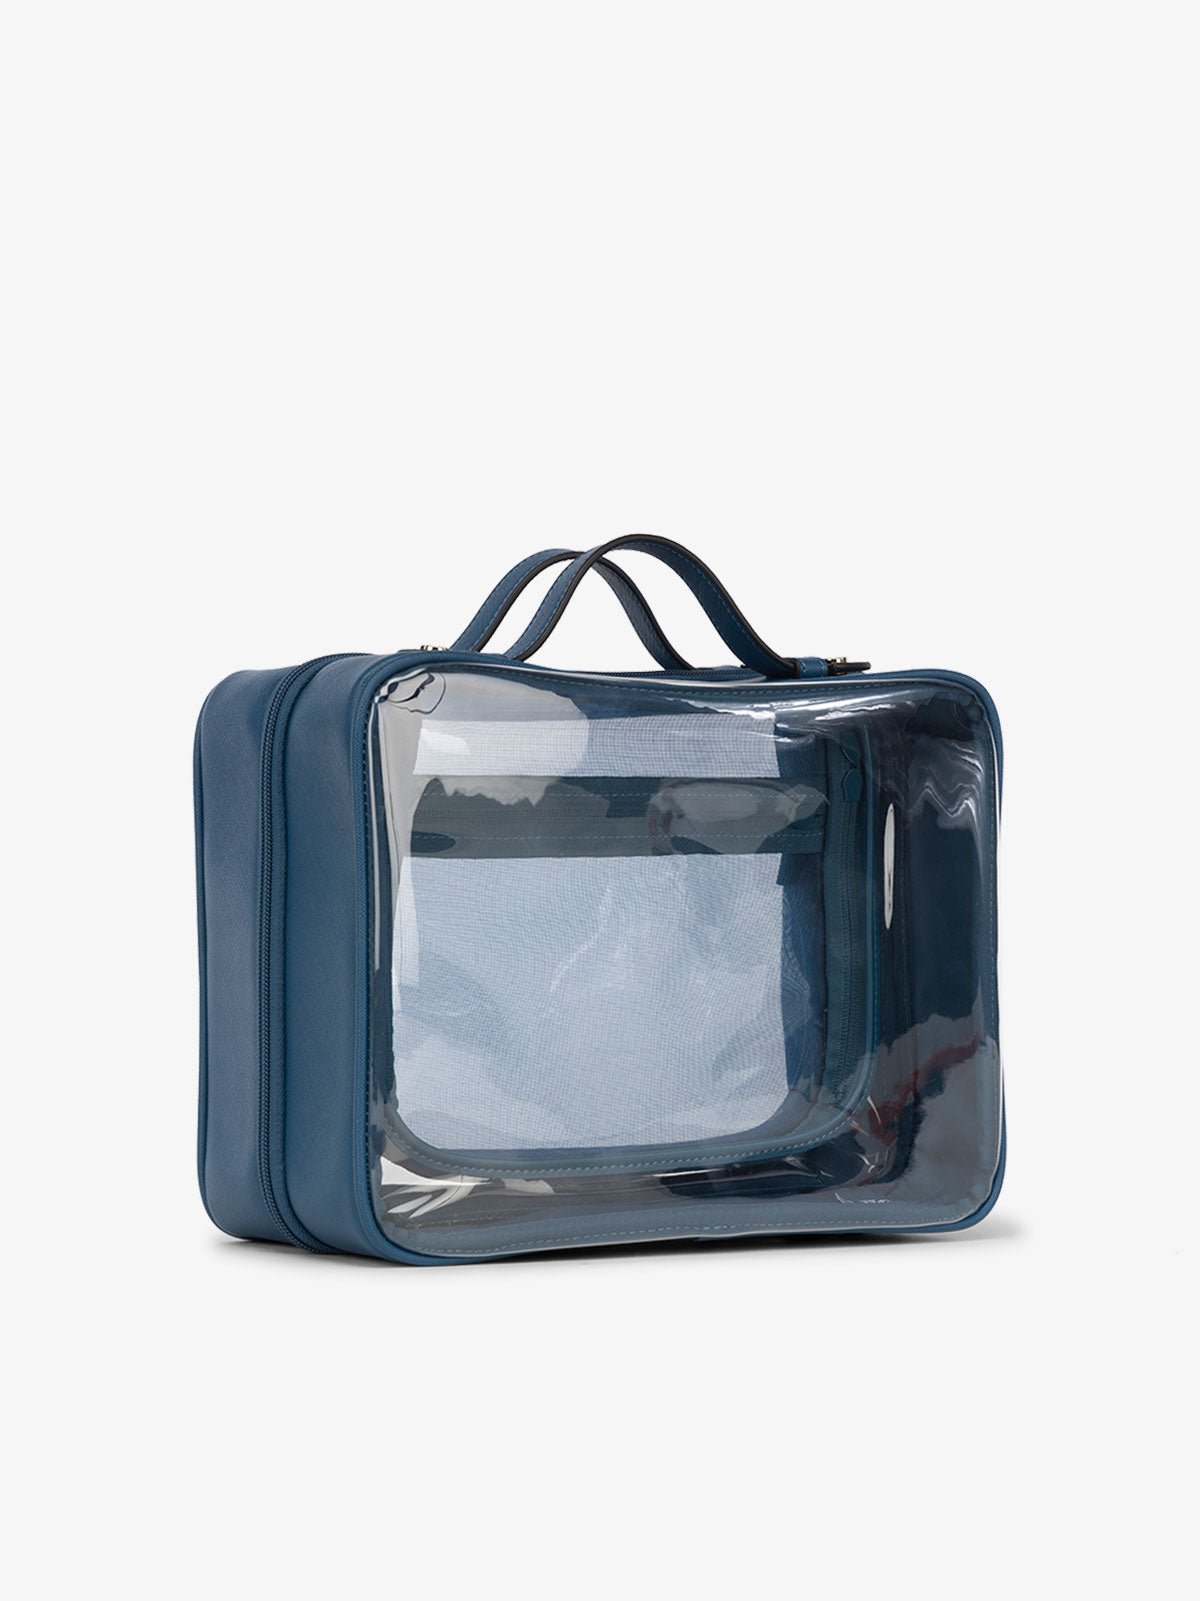 CALPAK large clear cosmetics travel case with dual handles in dark blue